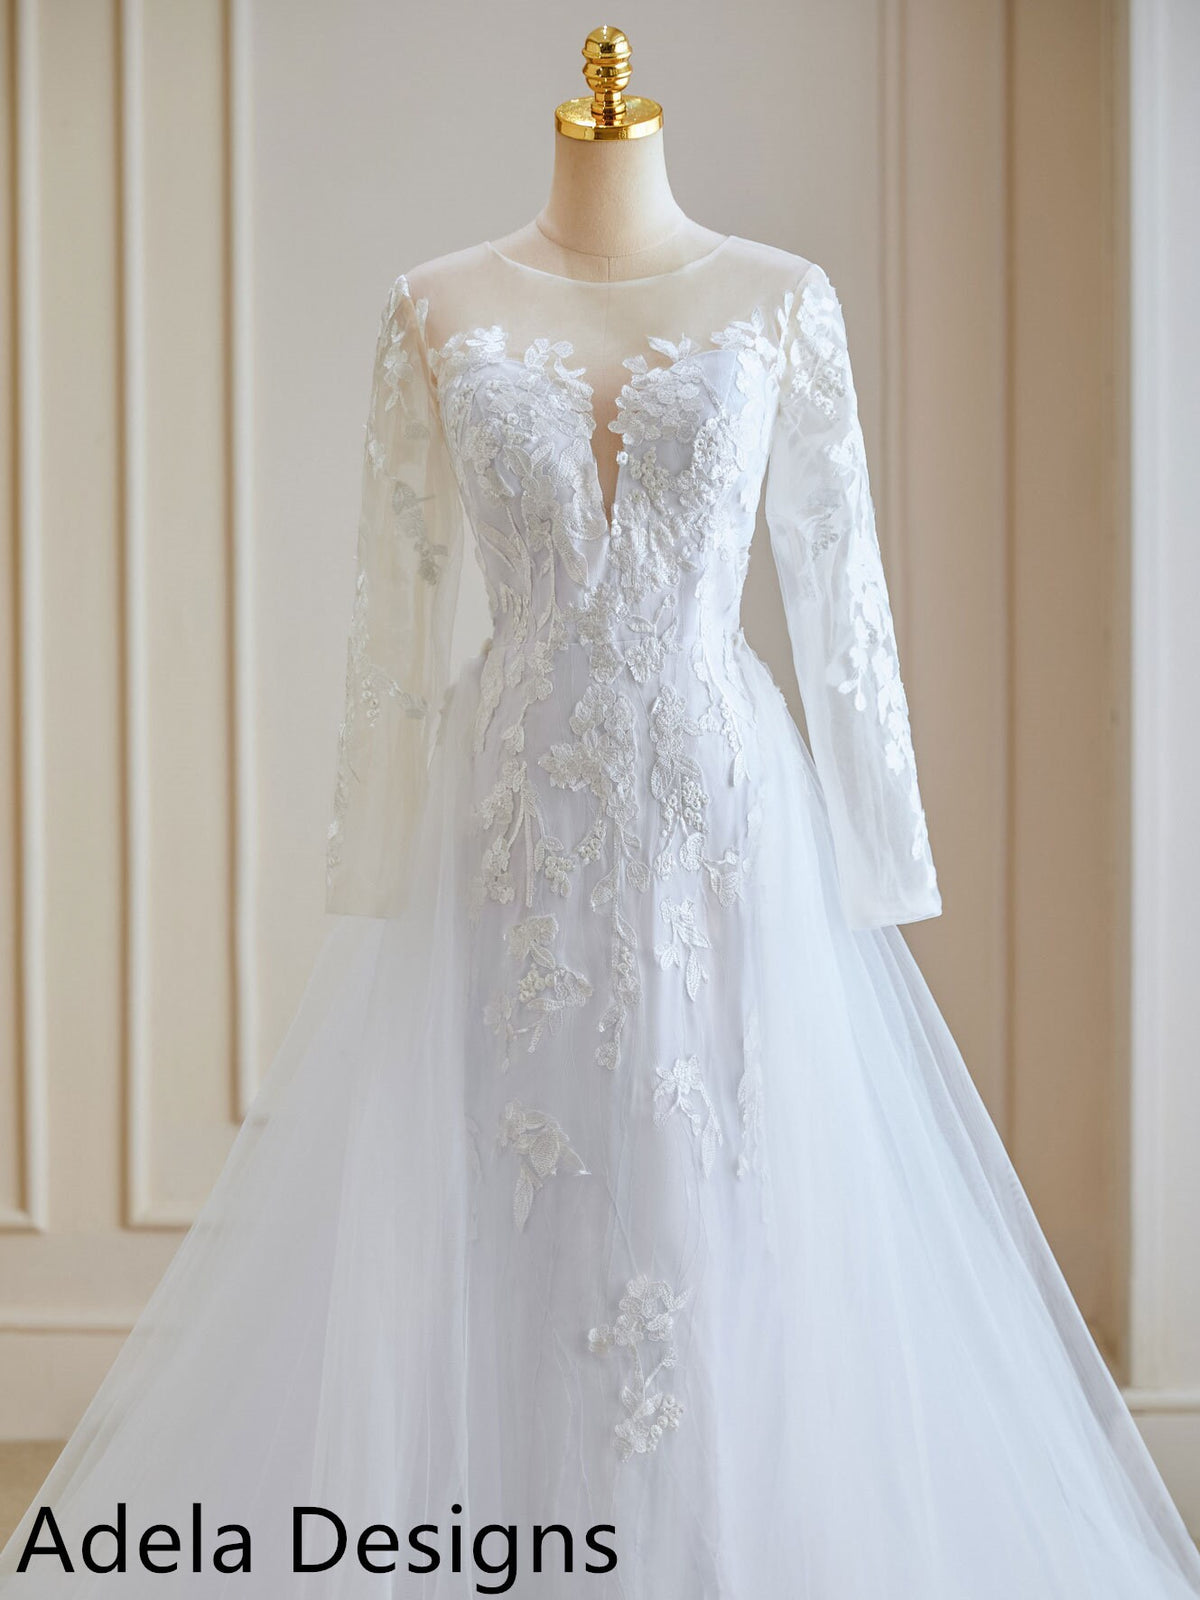 Long Sleeve Mermaid Wedding Dress Bridal Gown Detachable Tulle Train Illusion Open Back Buttons Lace